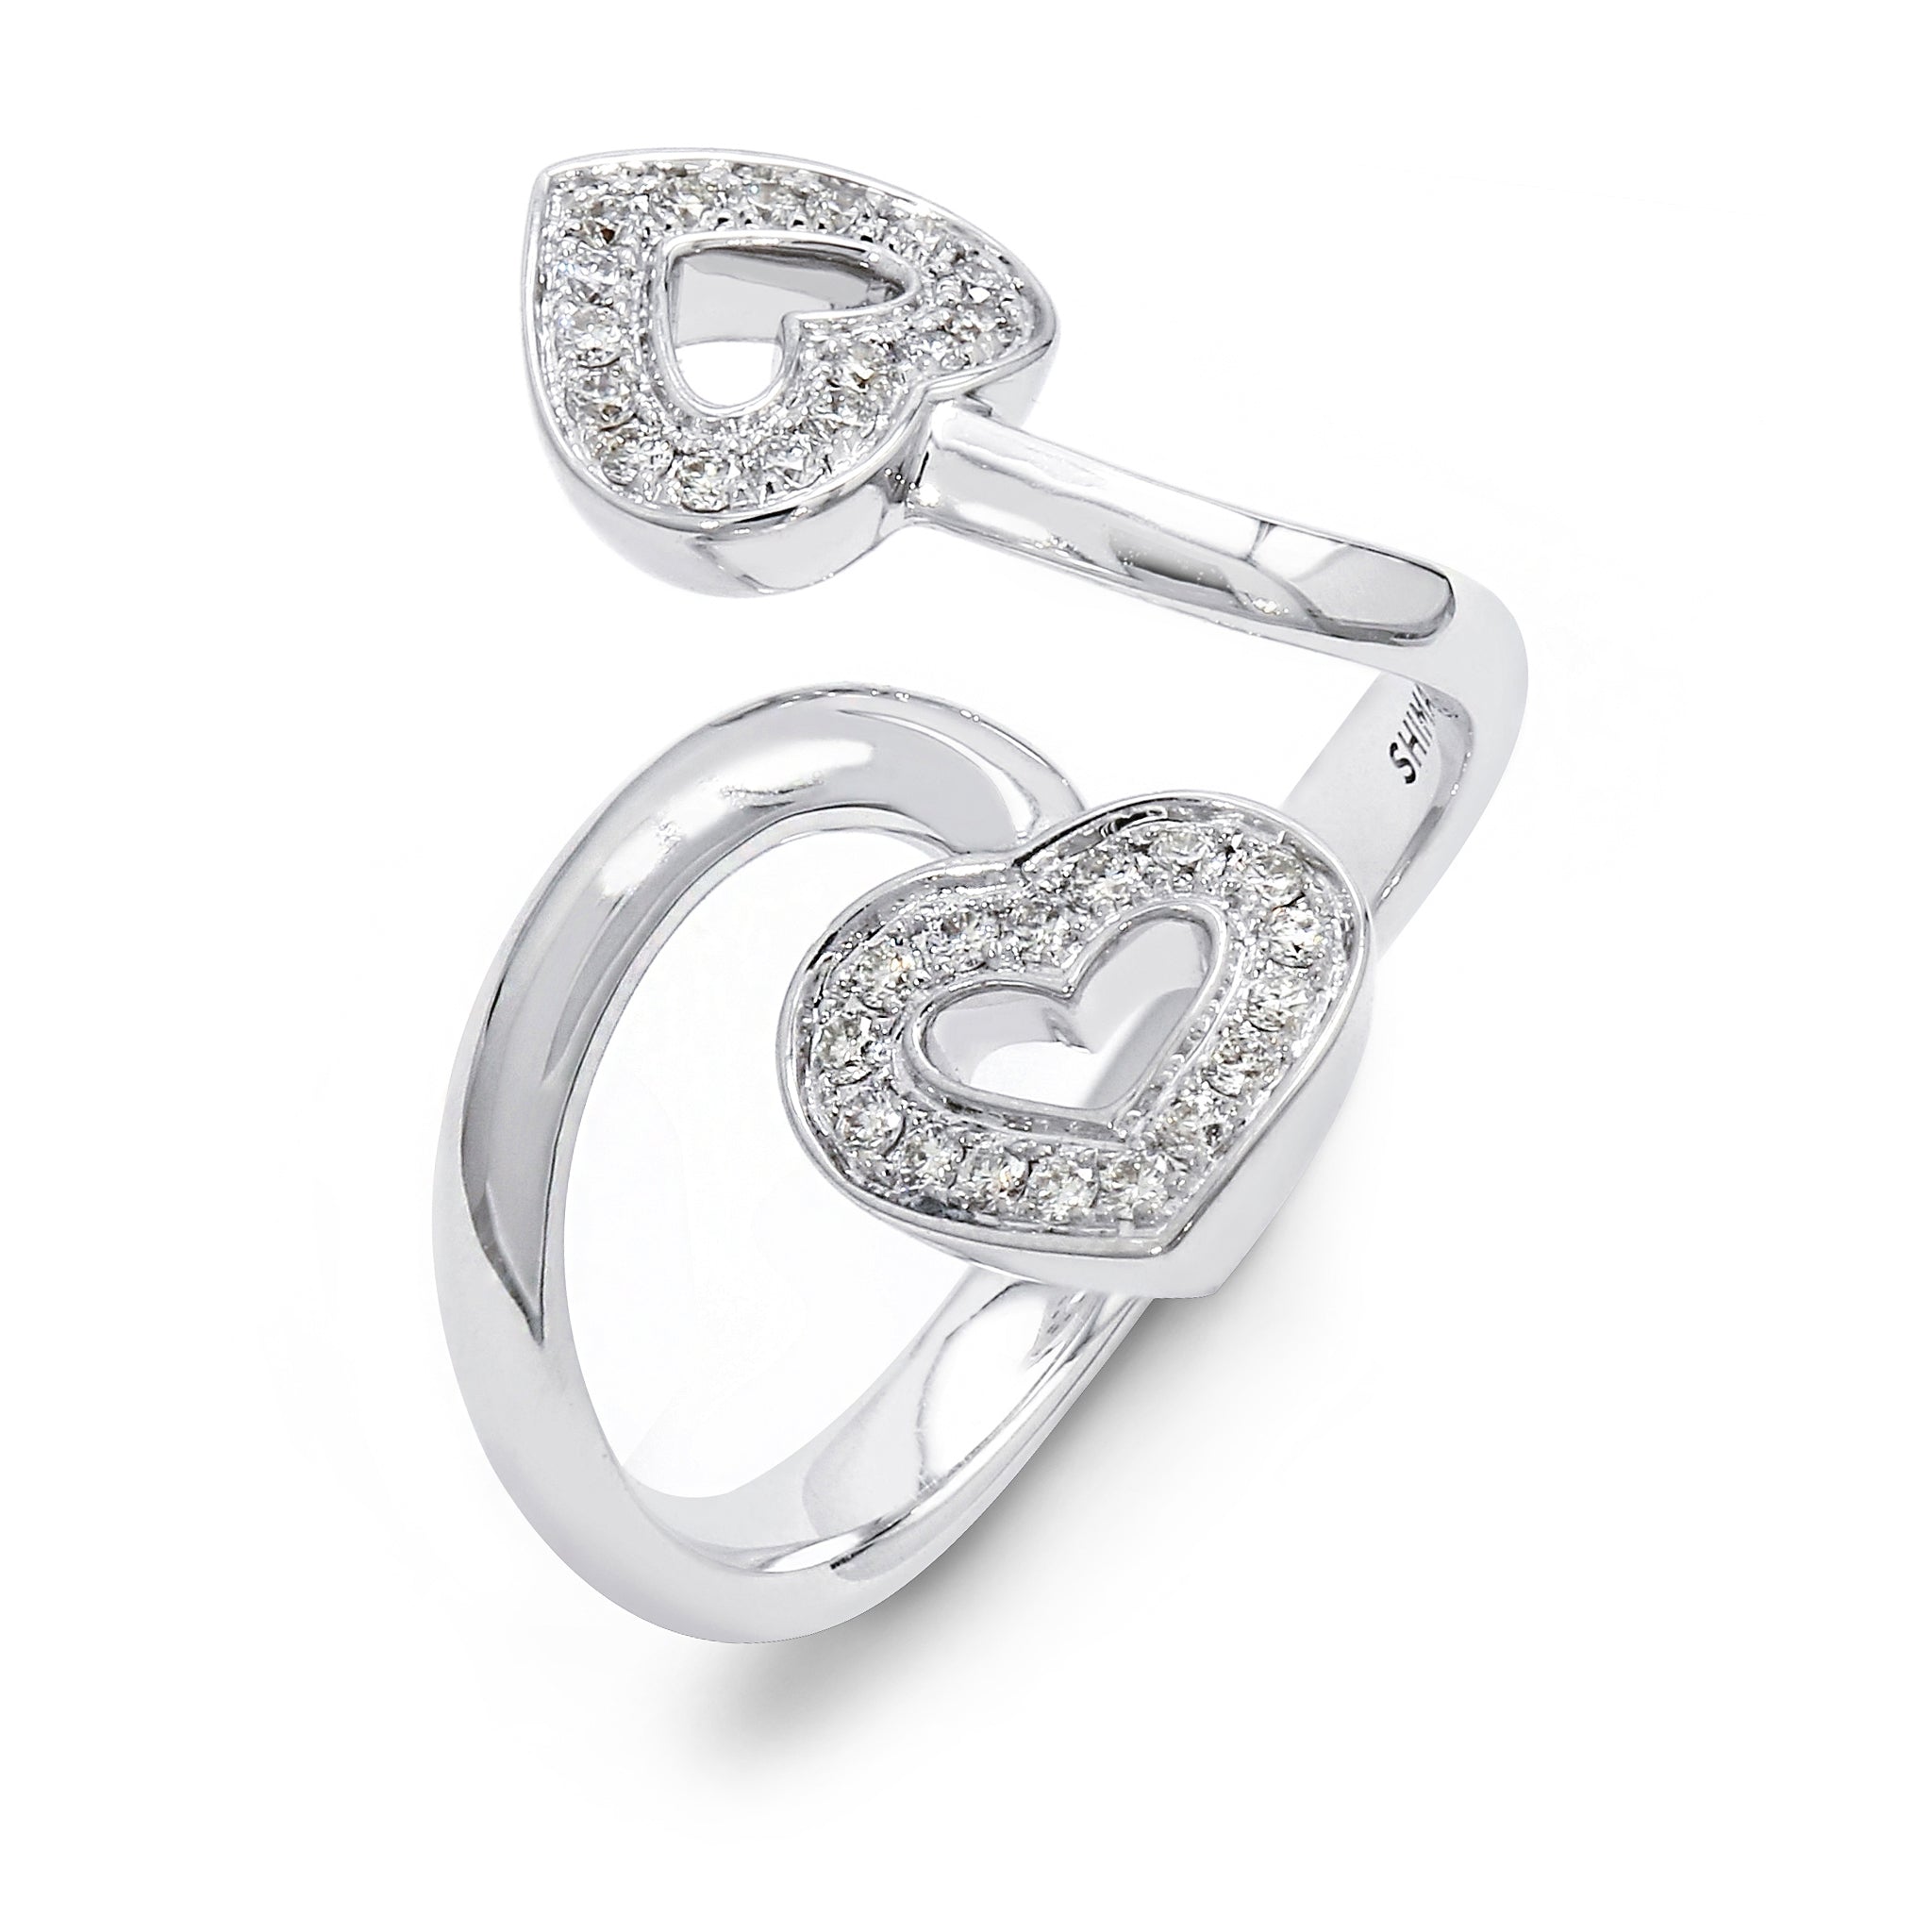 Shimansky - Two Hearts Twist Diamond Pave Ring 0.20ct crafted in 18K White Gold